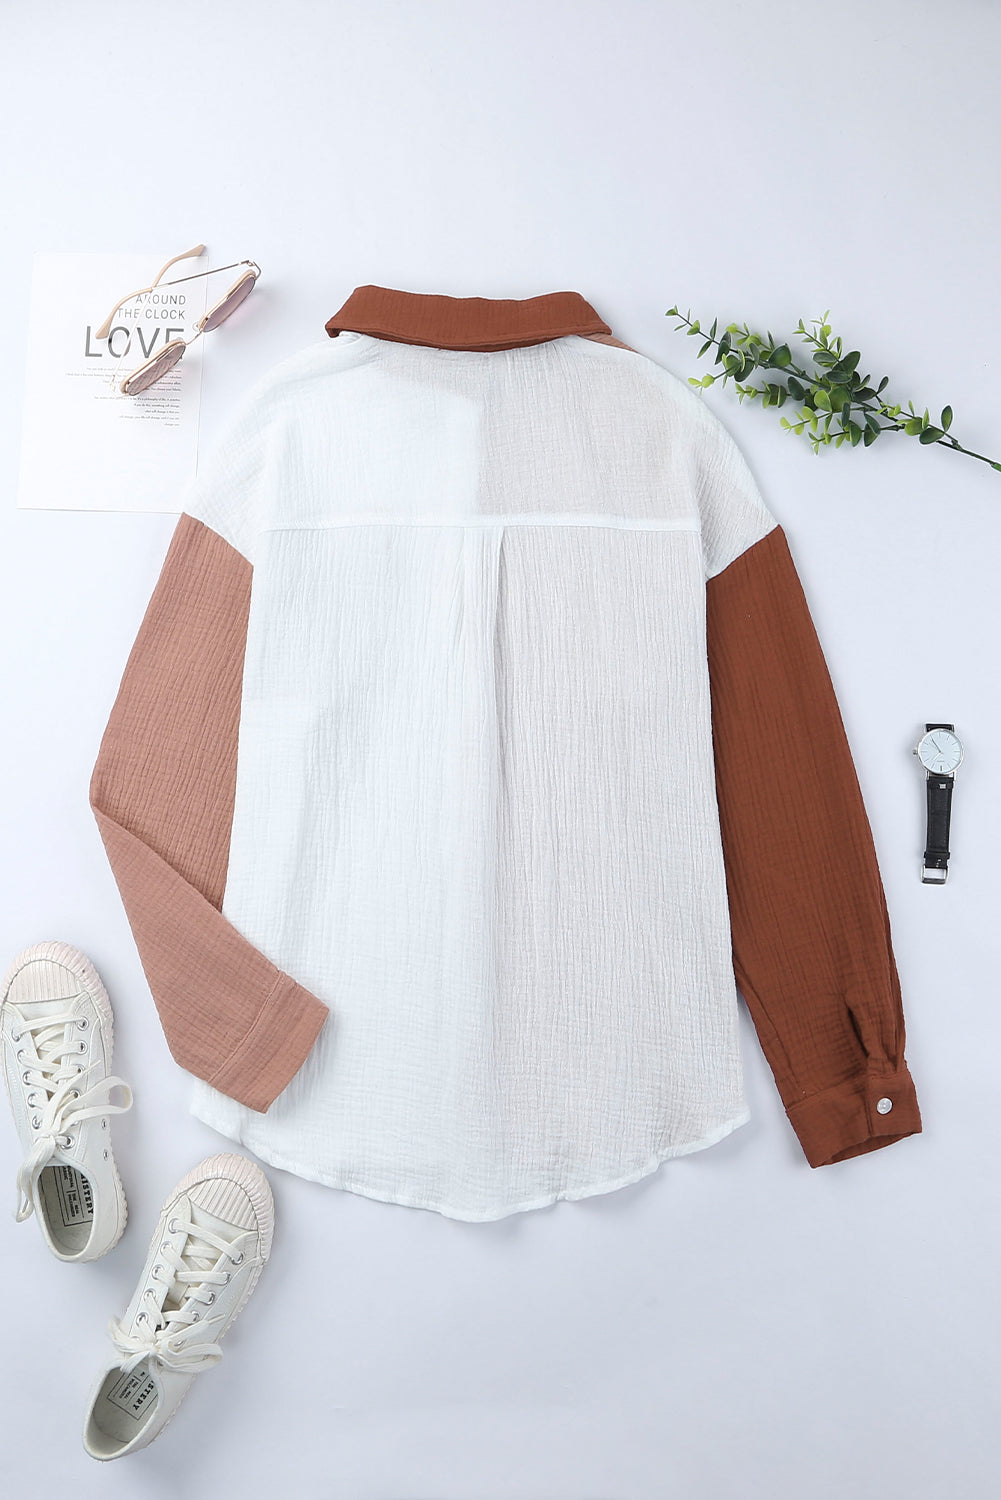 Brown Color Block Textured Long Sleeve Shirt with Pocket